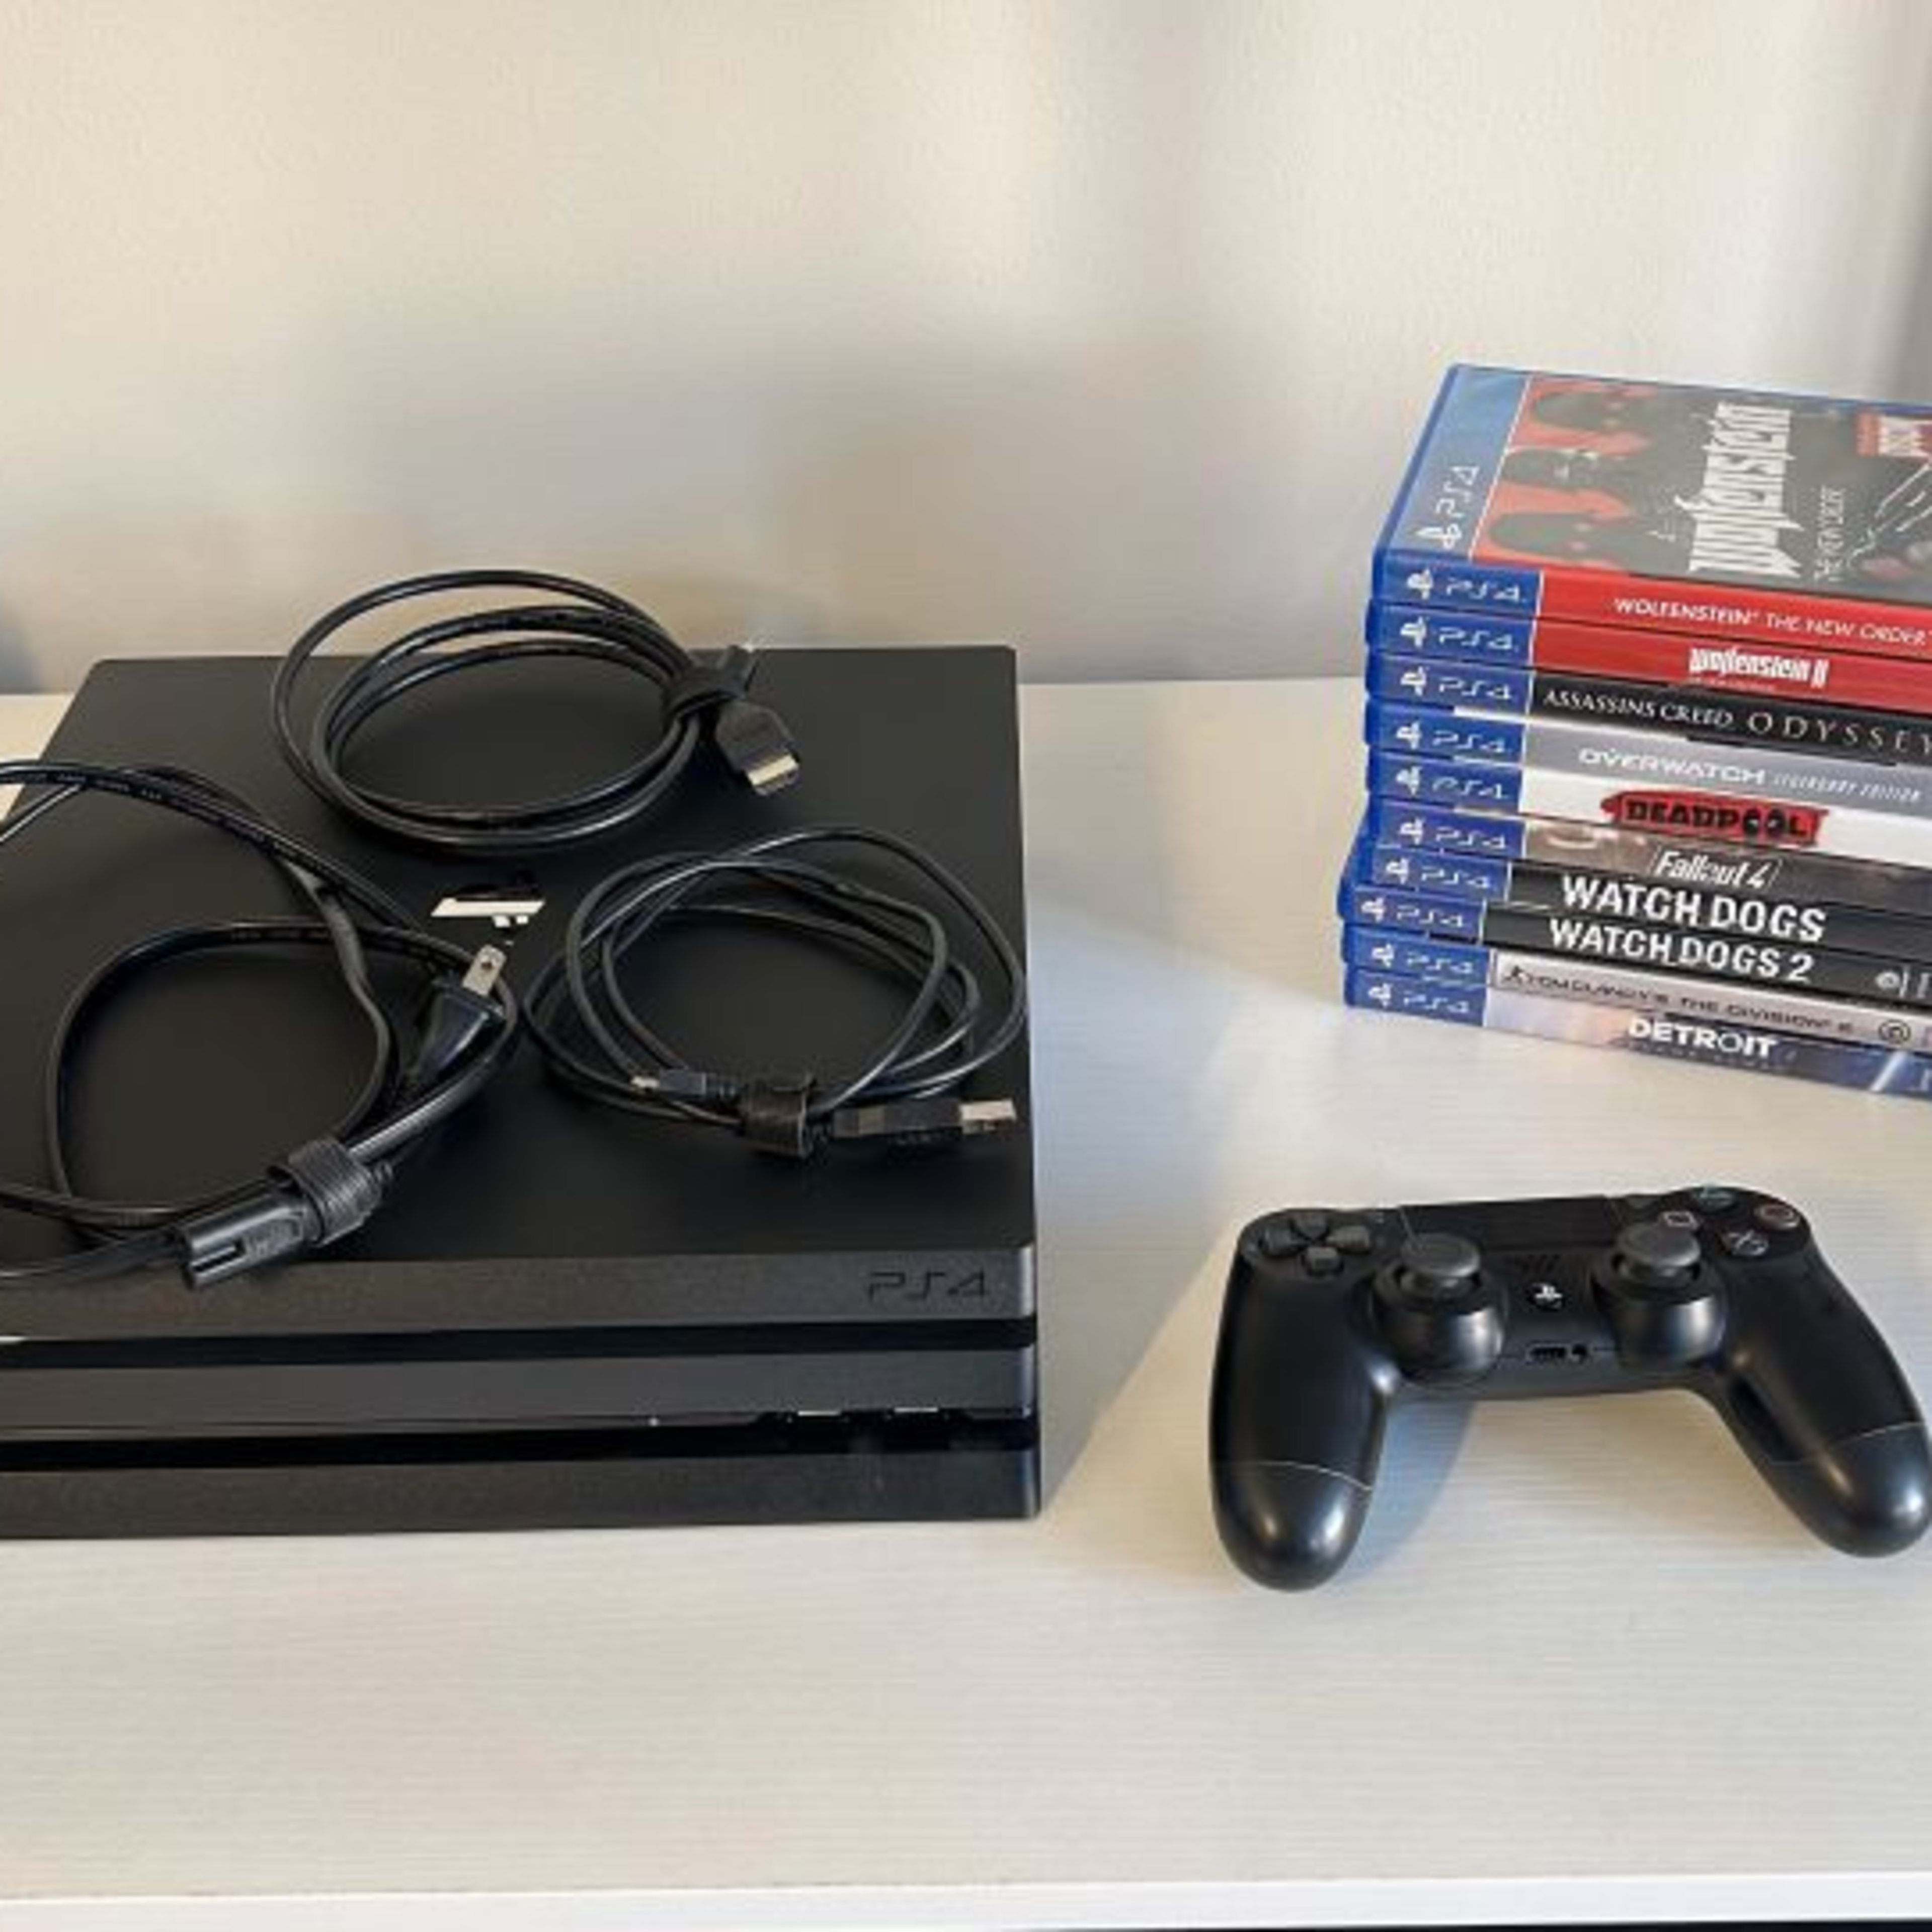 PS4 Pro (1 TB) - 10 Games Included (See Product Description for Titles)